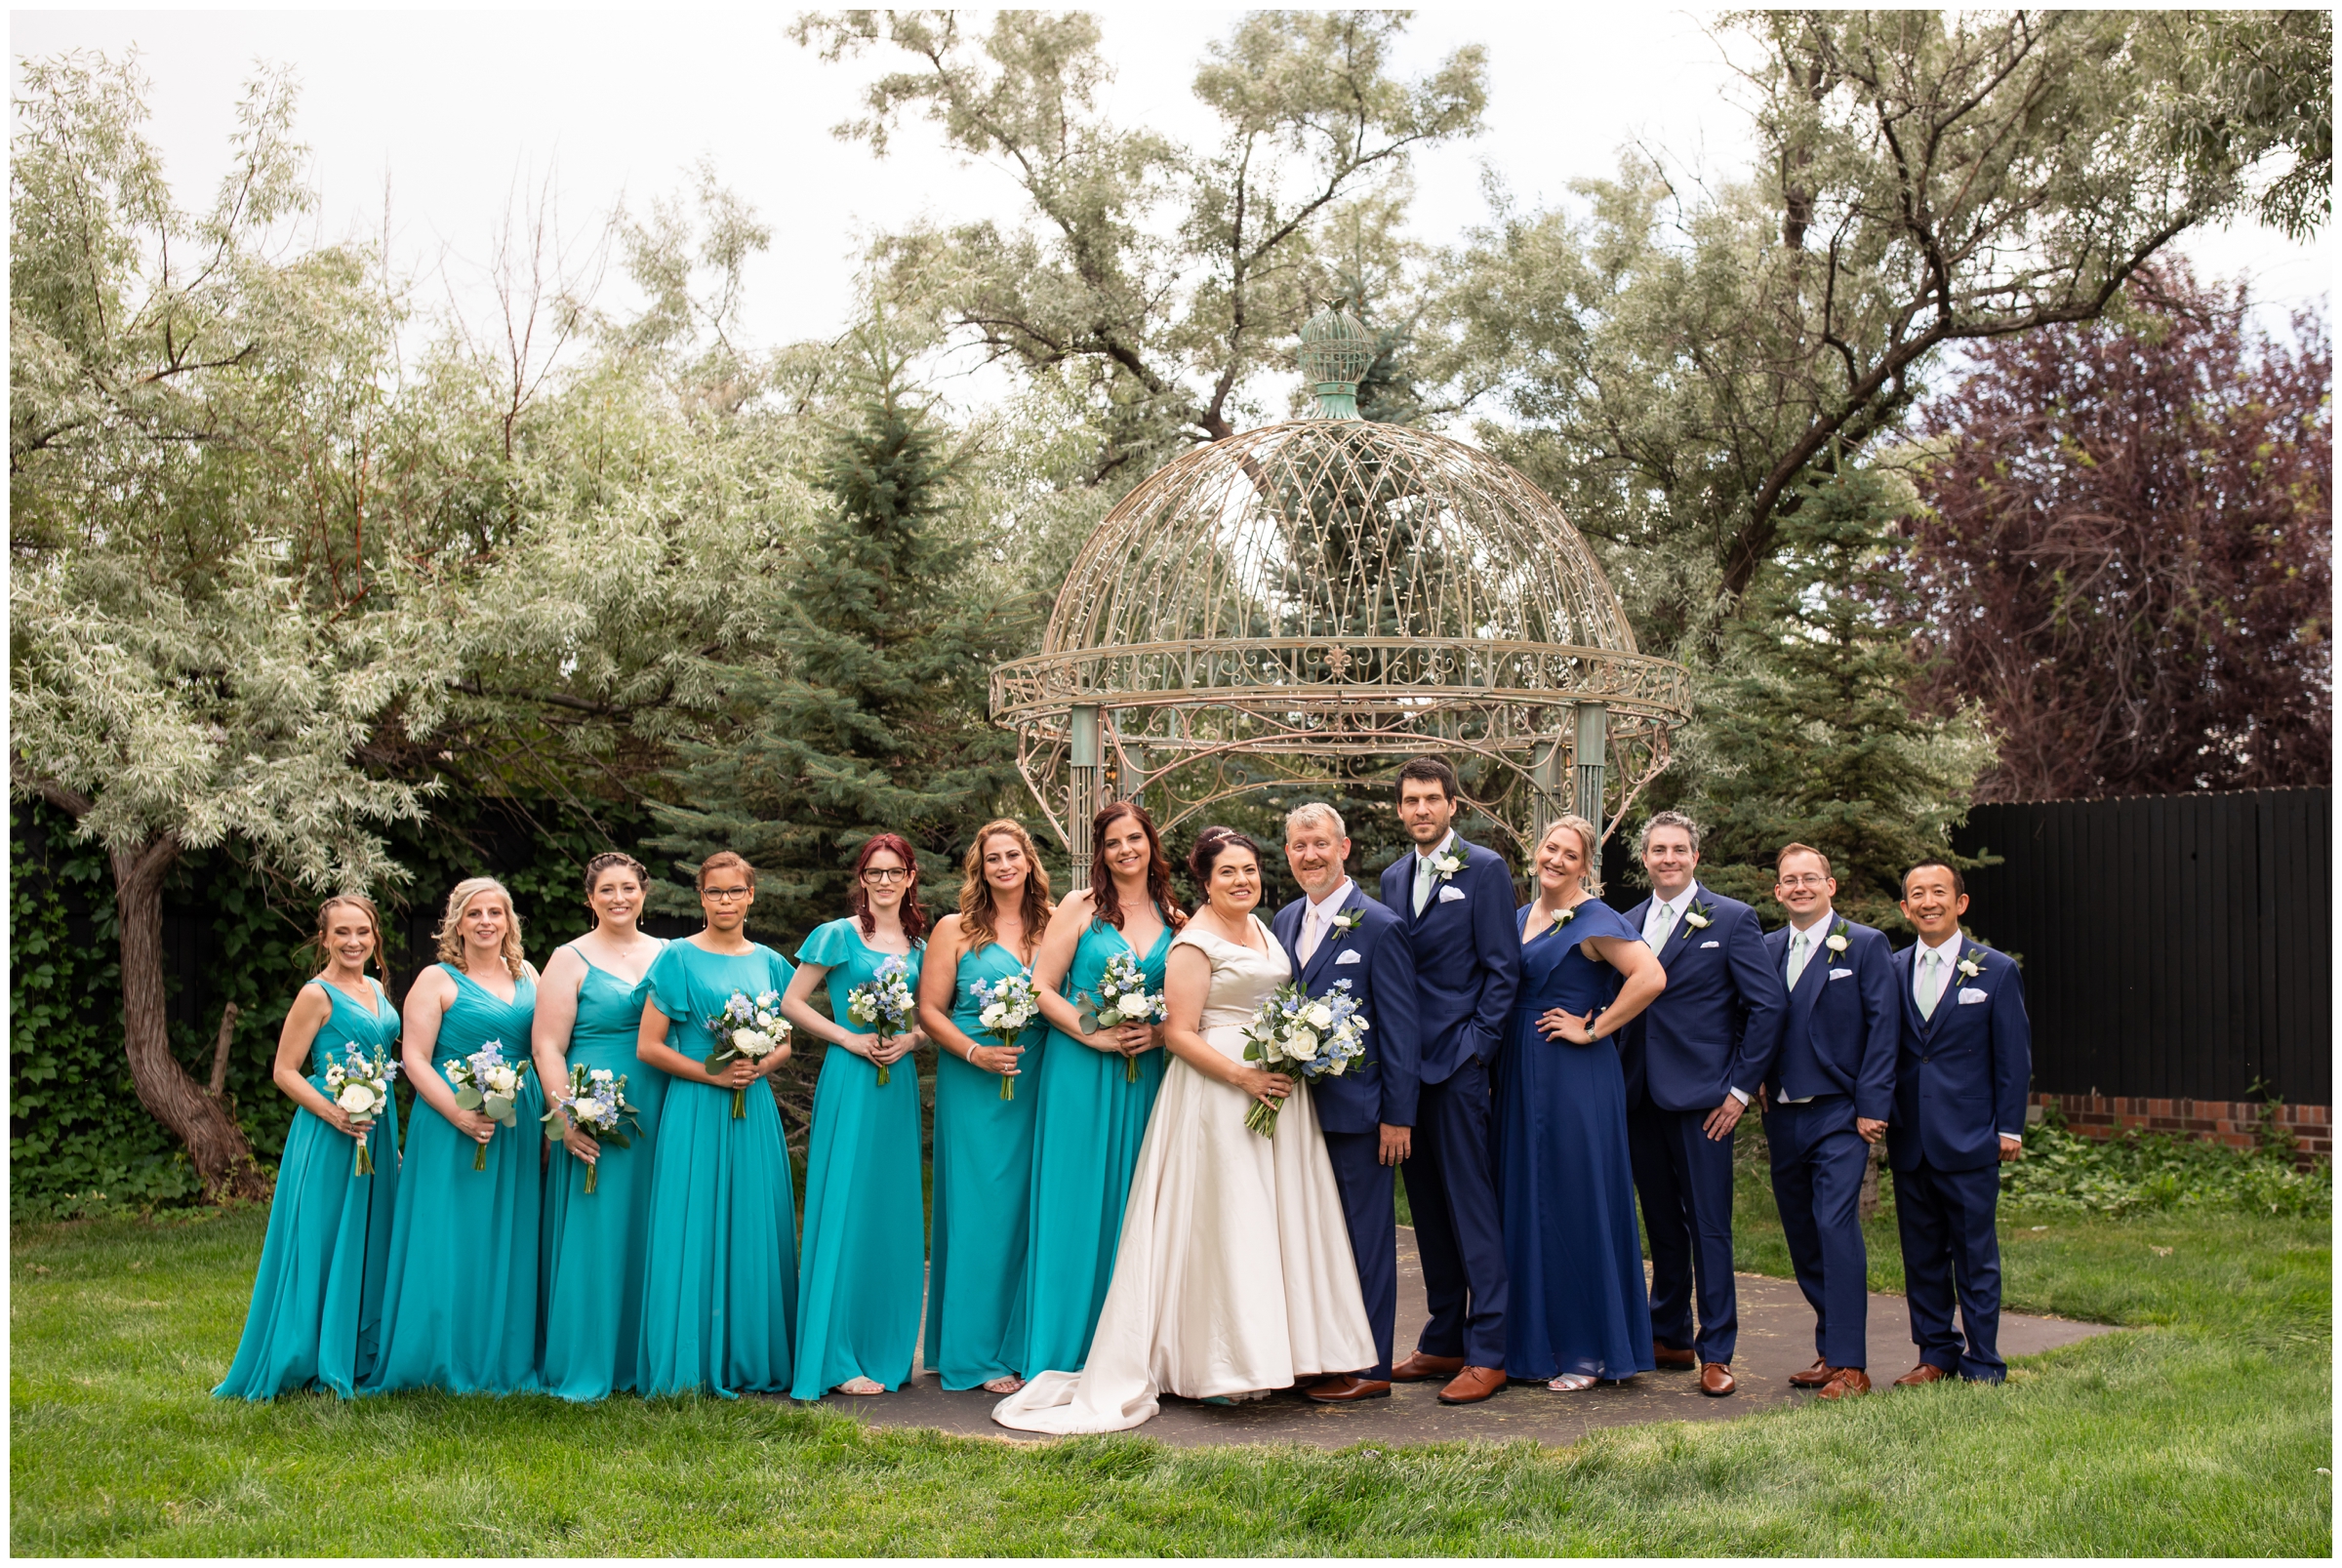 wedding party in aqua and navy blue posing in front of gazebo at Lionsgate Event Center wedding in Colorado 